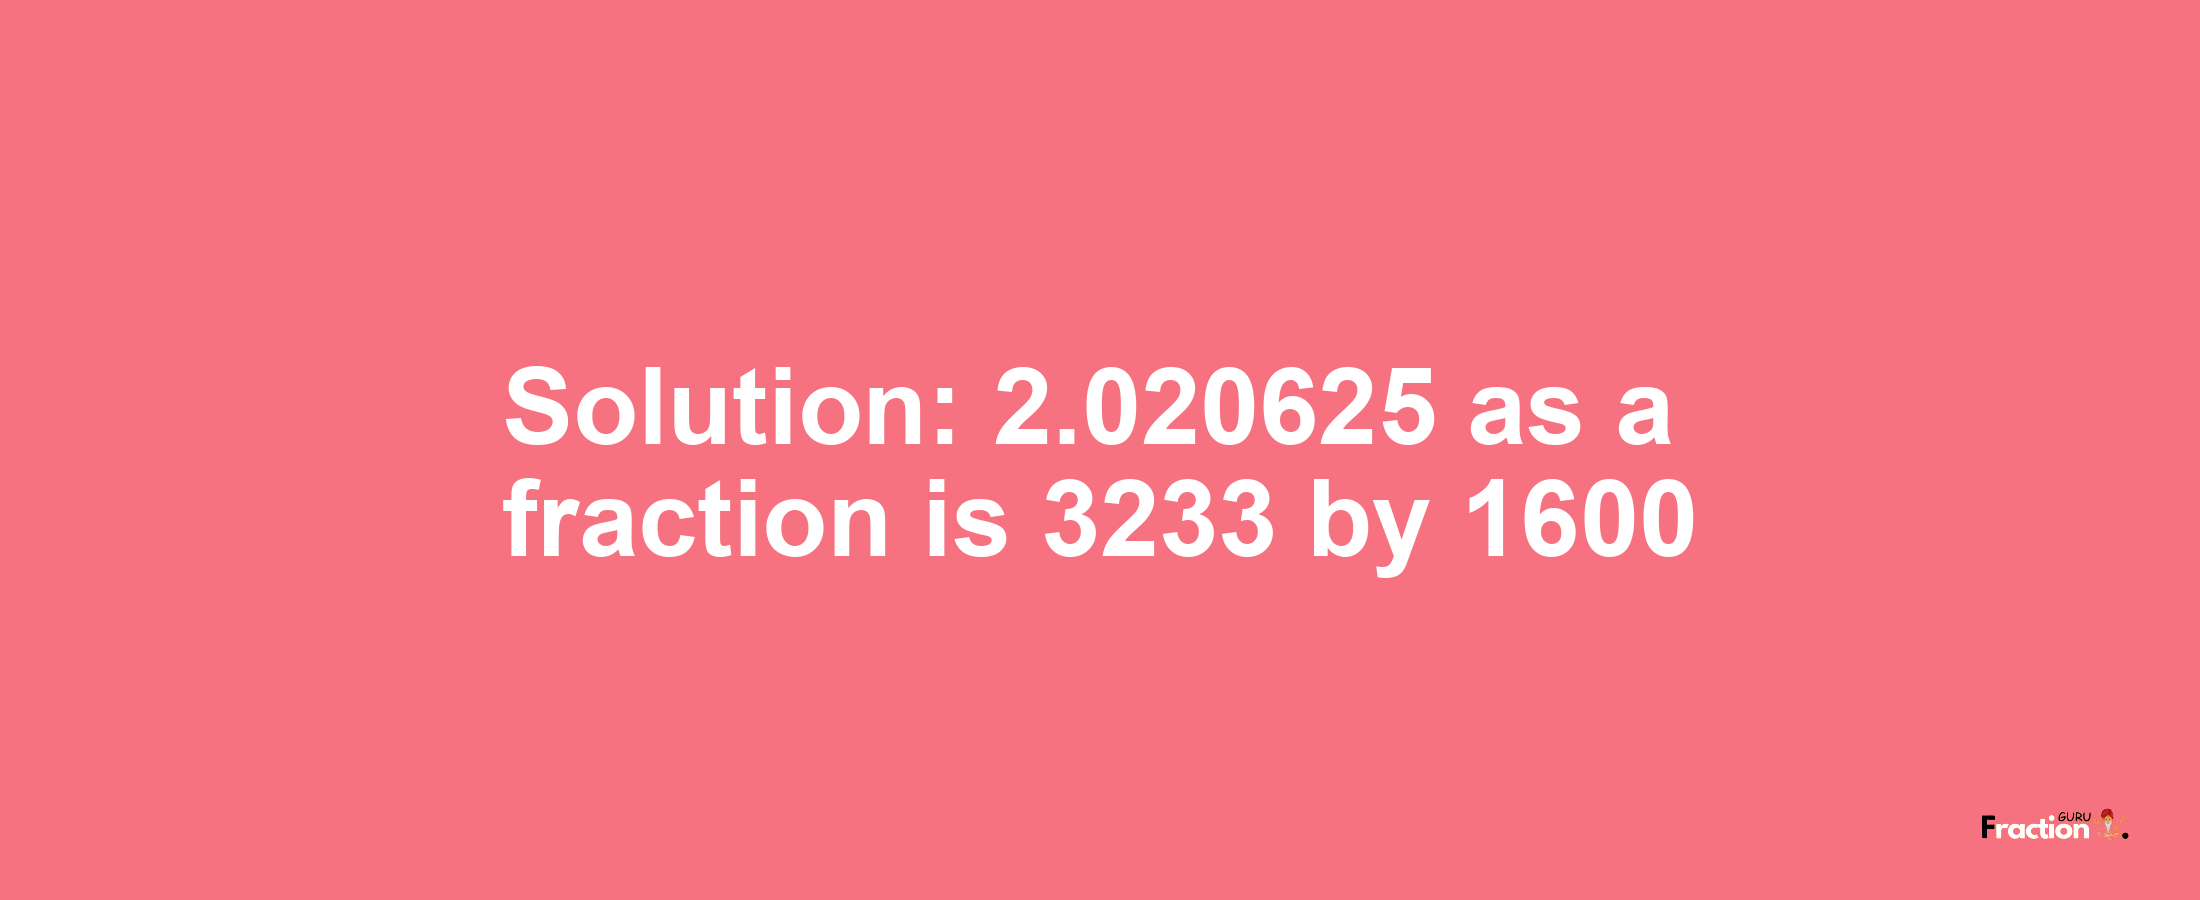 Solution:2.020625 as a fraction is 3233/1600